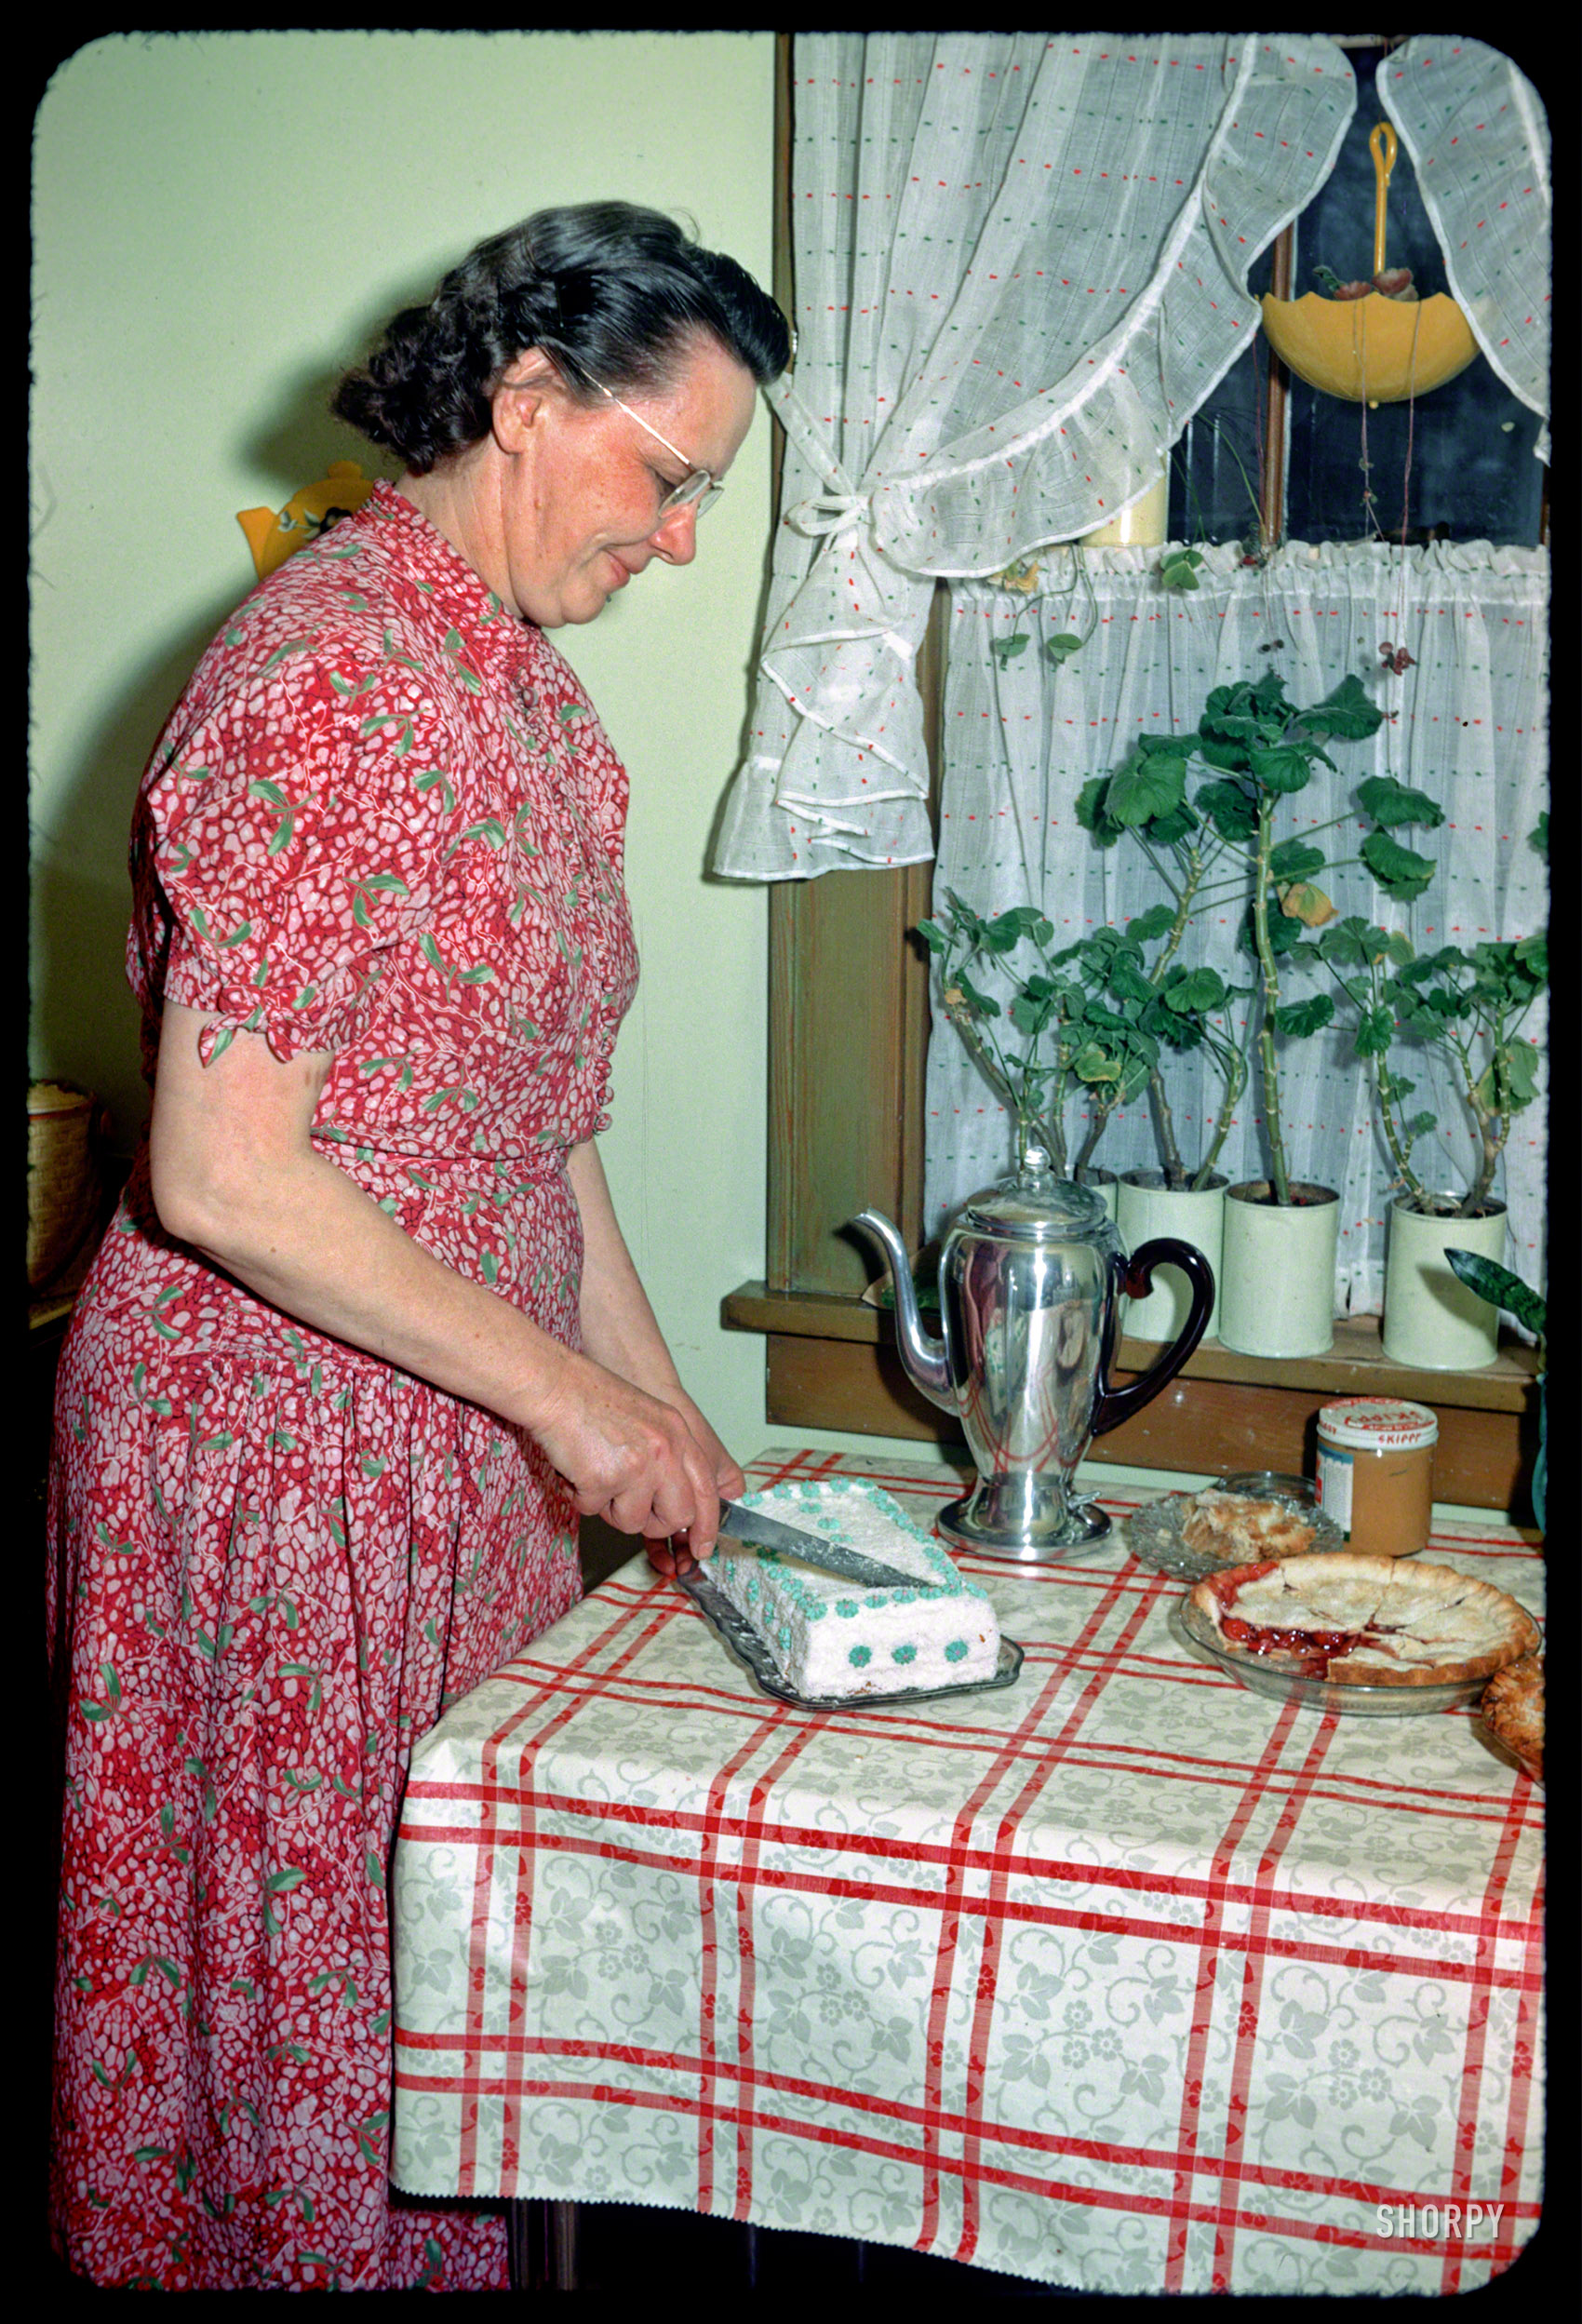 "Amy Frandle -- 2 March 1952." The latest episode of Minnesota Kodachromes takes place at the kitchen table. The cake looks delicious, but we'll start with a slice of that cherry pie, please. 35mm color slide by Hubert Tuttle. View full size.